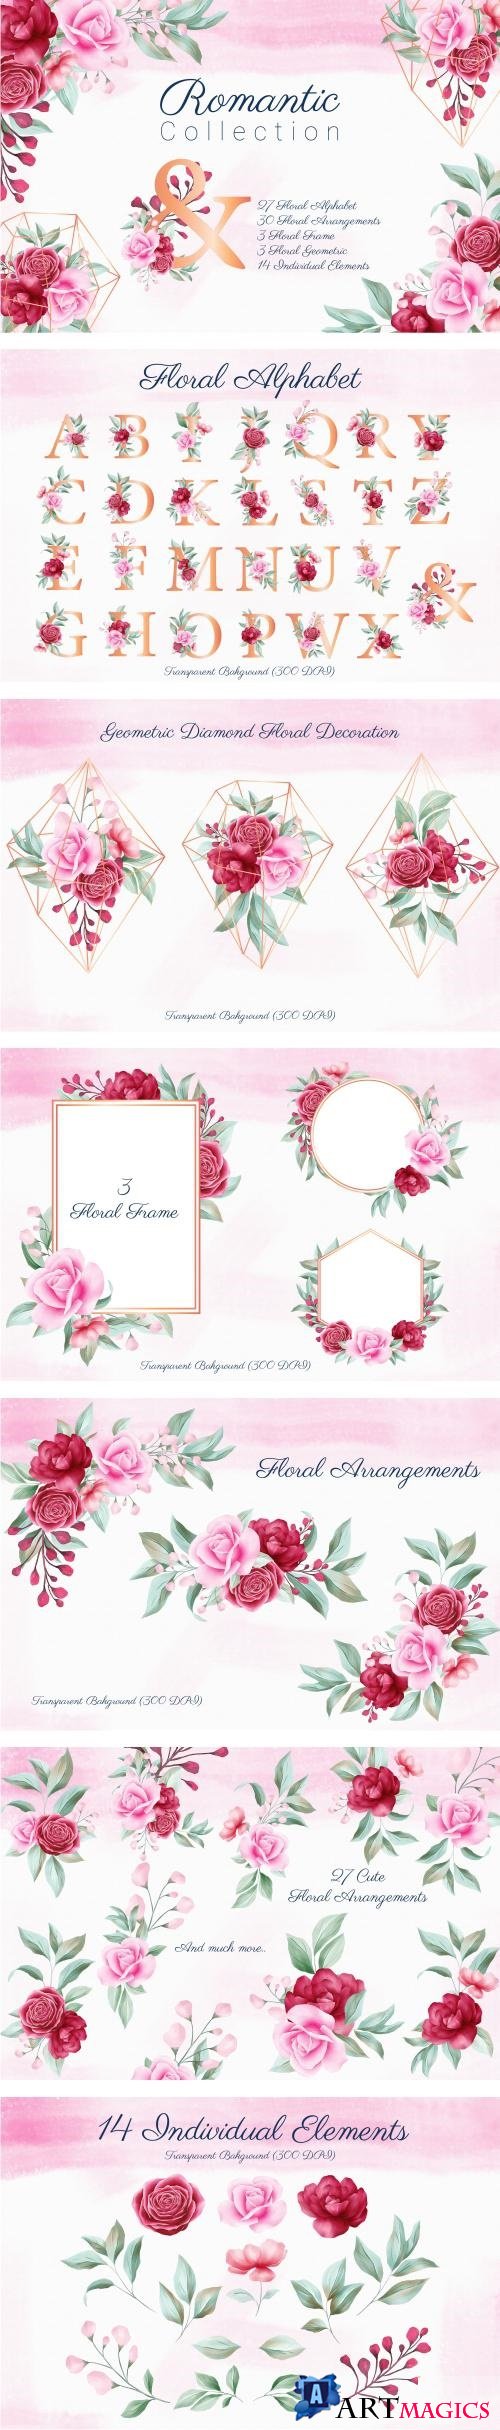 Romantic Watercolor Flowers Collection - 363012